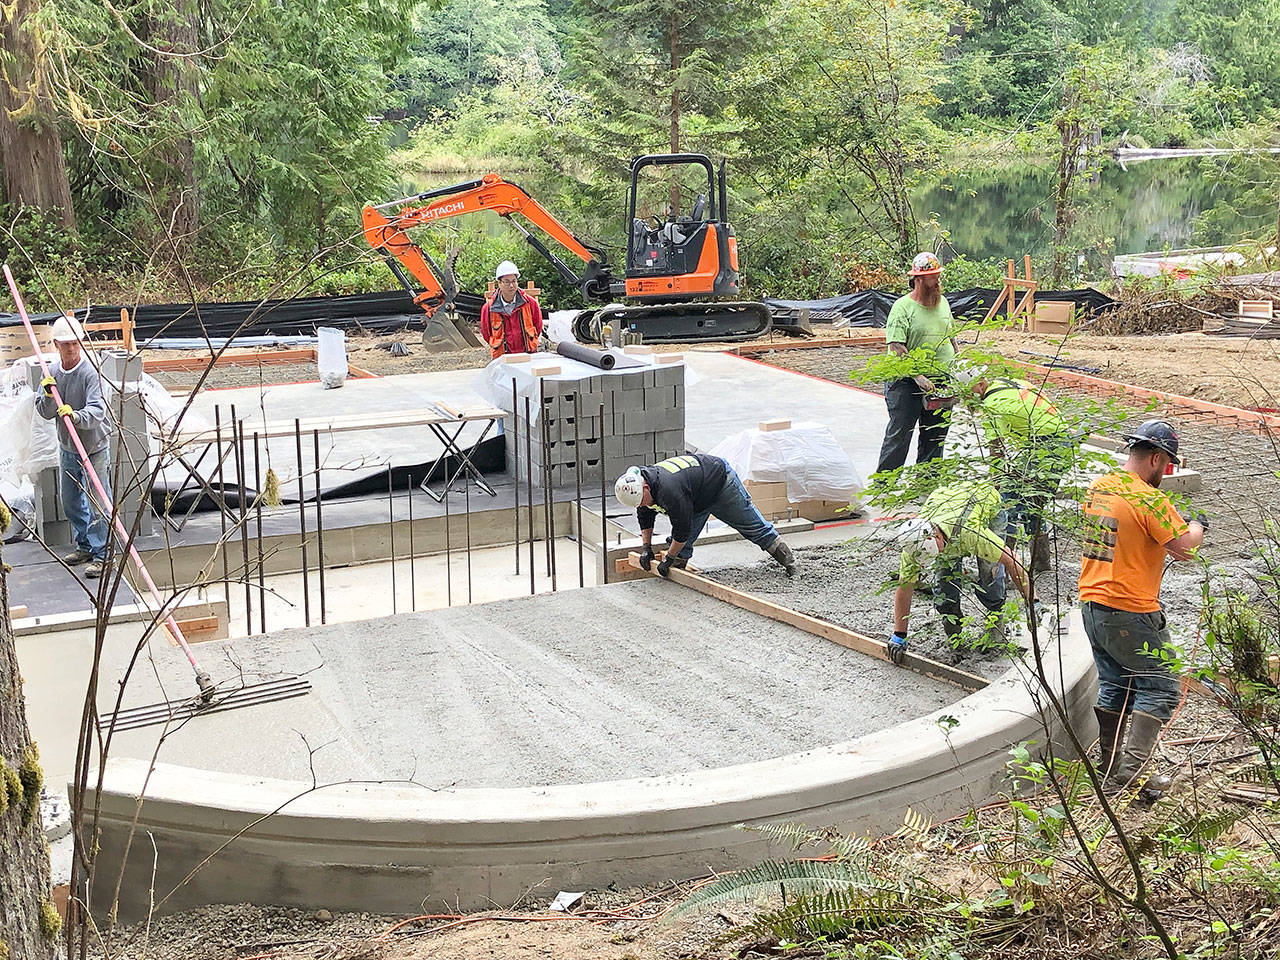 (Photo courtesy Helen Hepp, Friends of Schafer and Lake Sylvia) Workers smooth cement for the foundation of a new pavilion at Lake Sylvia in Montesano. The pavilion is designed to be used year-round. New bathrooms and improvements to accessability also will be constructed.